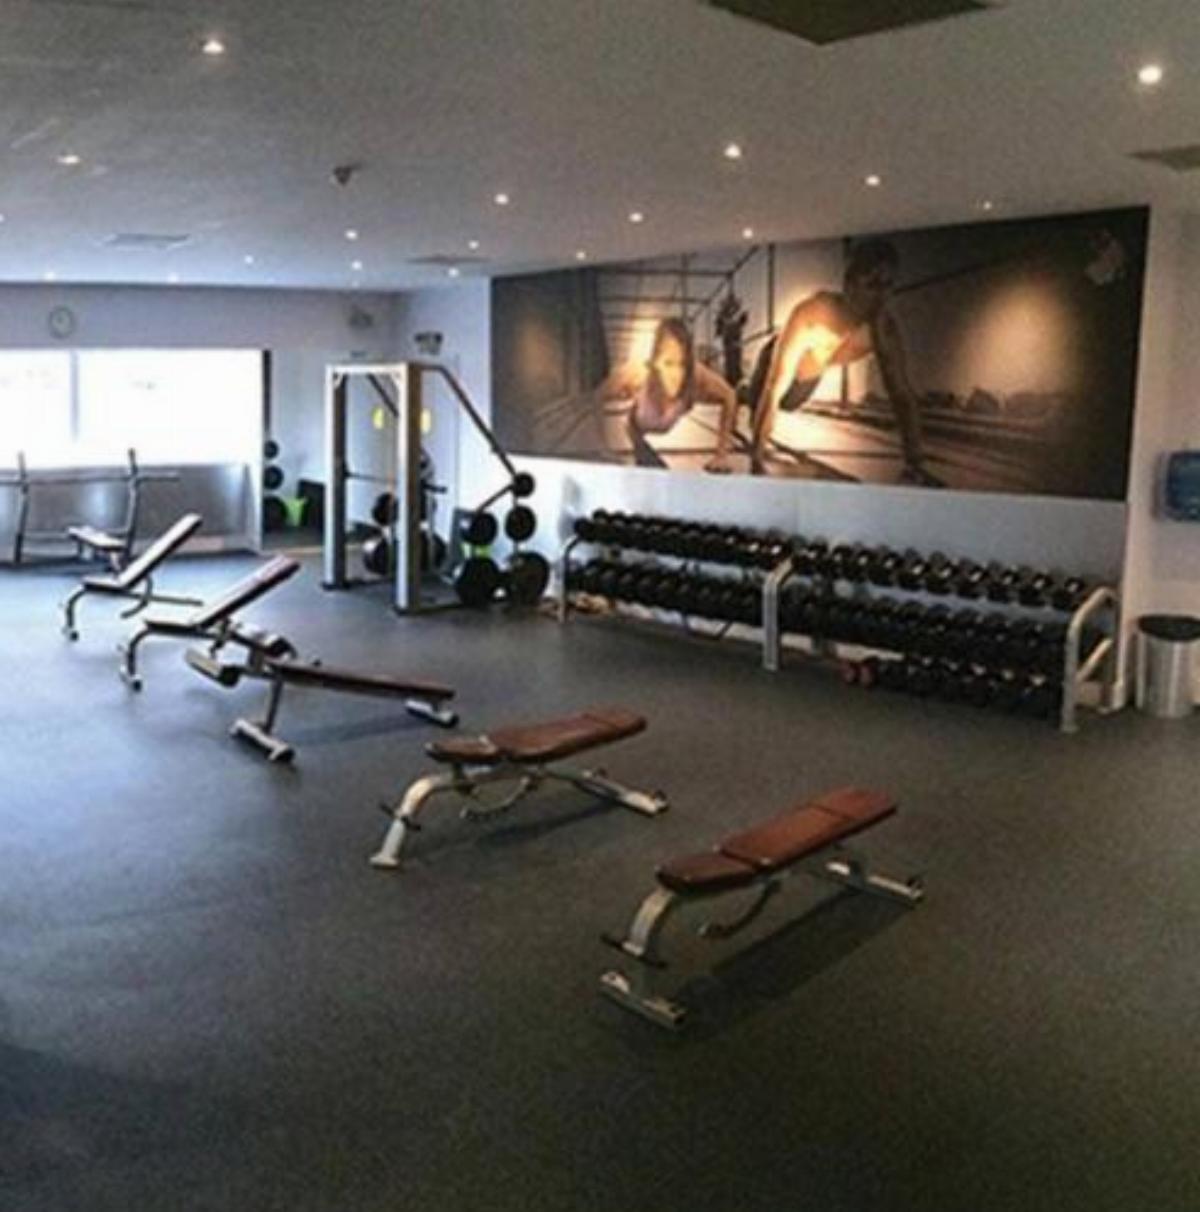 Bed and breakfast spa and gym Hotel Hendon United Kingdom